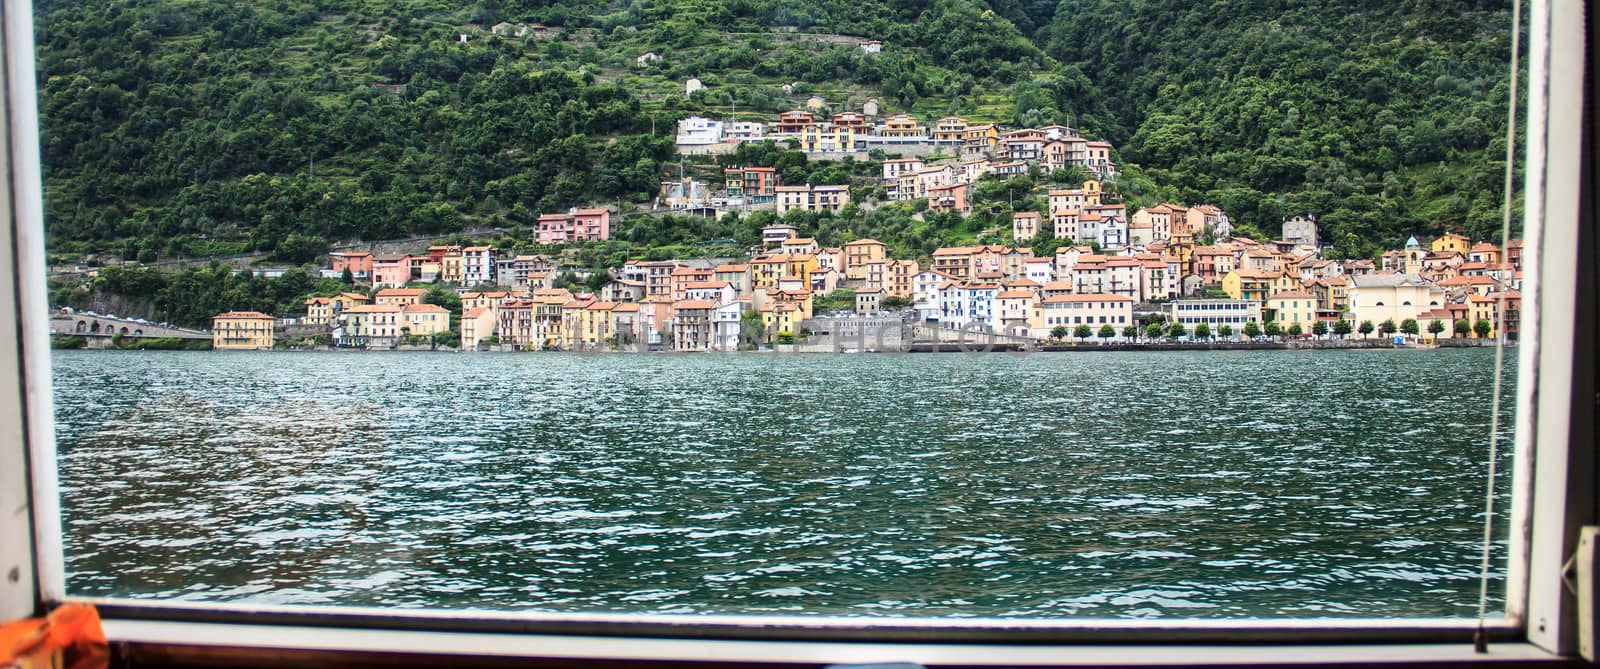 Panoramic View of the village on the boat in Lake Como, Italy by victorflowerfly